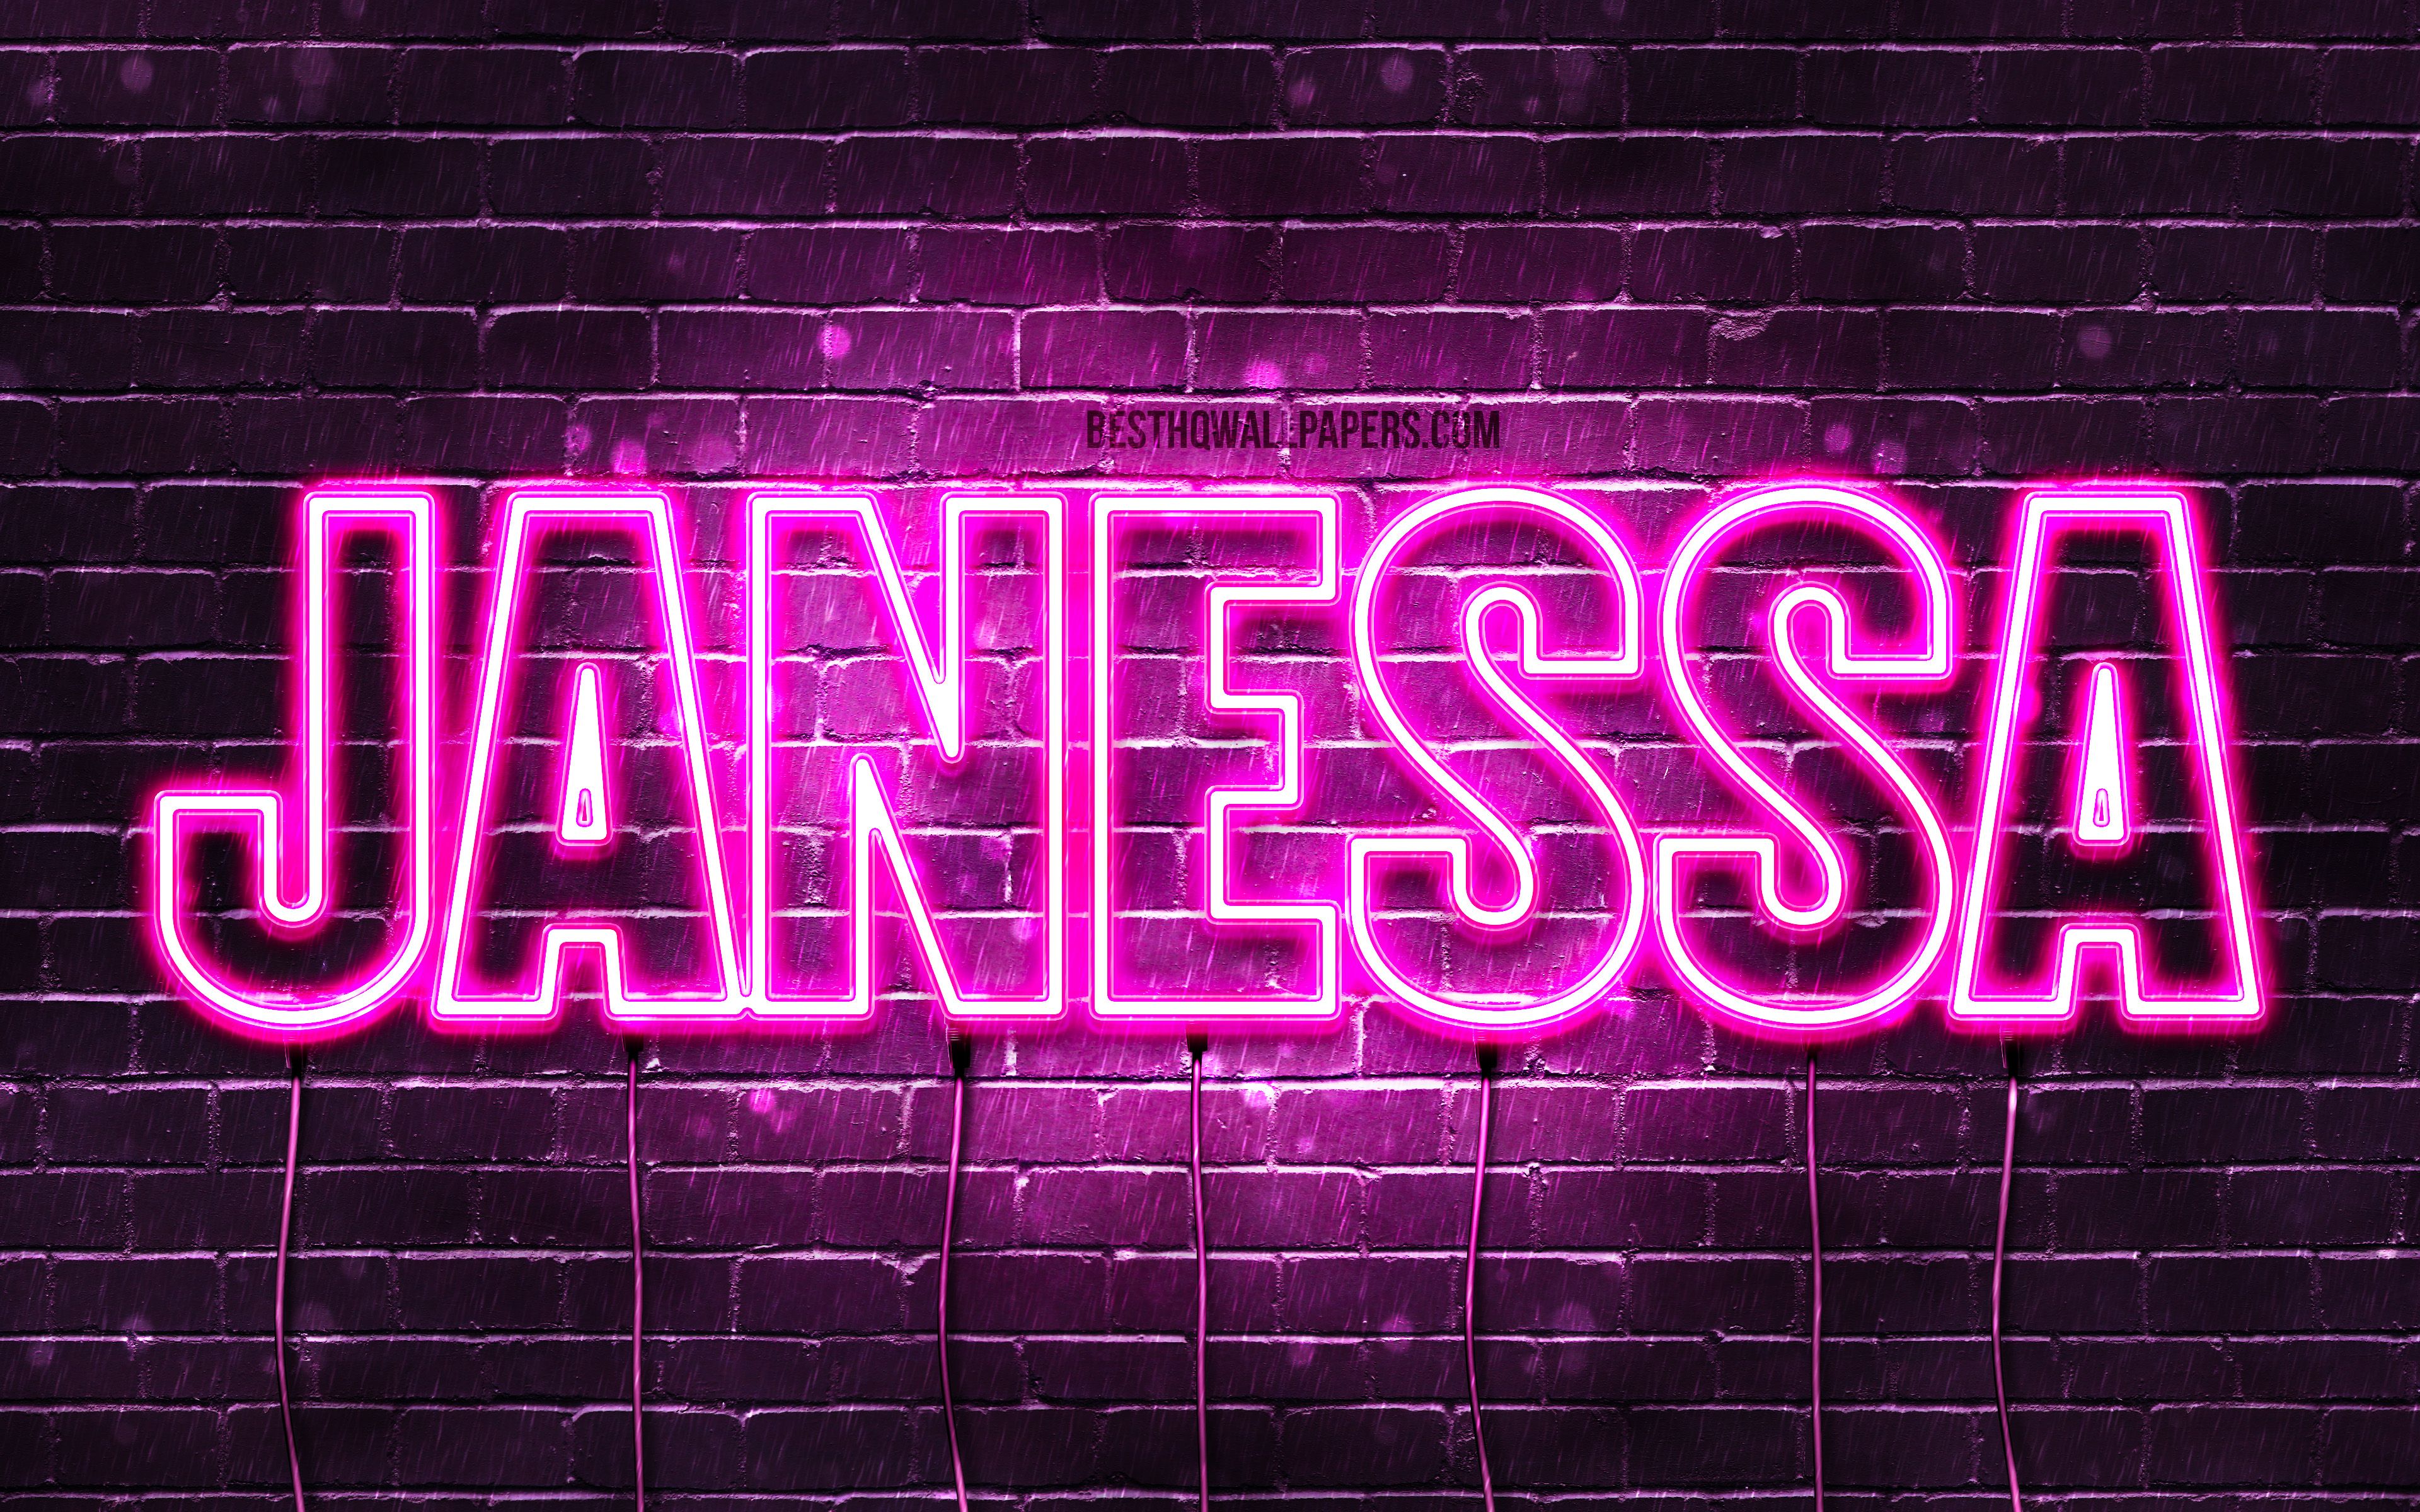 Download wallpaper Janessa, 4k, wallpaper with names, female names, Janessa name, purple neon lights, Happy Birthday Janessa, picture with Janessa name for desktop with resolution 3840x2400. High Quality HD picture wallpaper